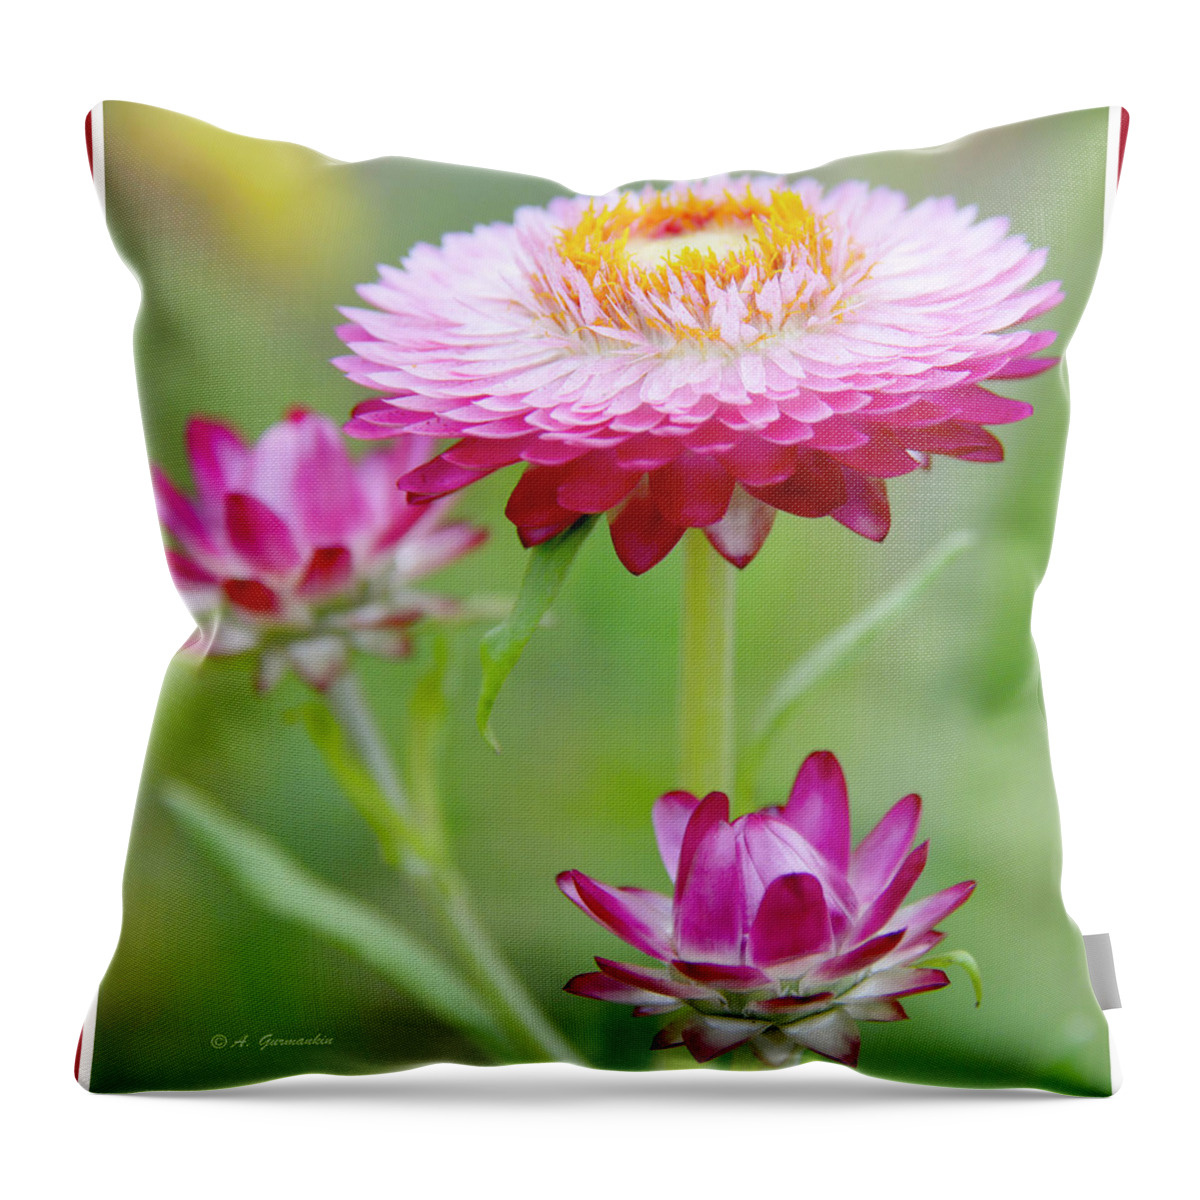 Macro Throw Pillow featuring the photograph Strawflower Blossoms by A Macarthur Gurmankin